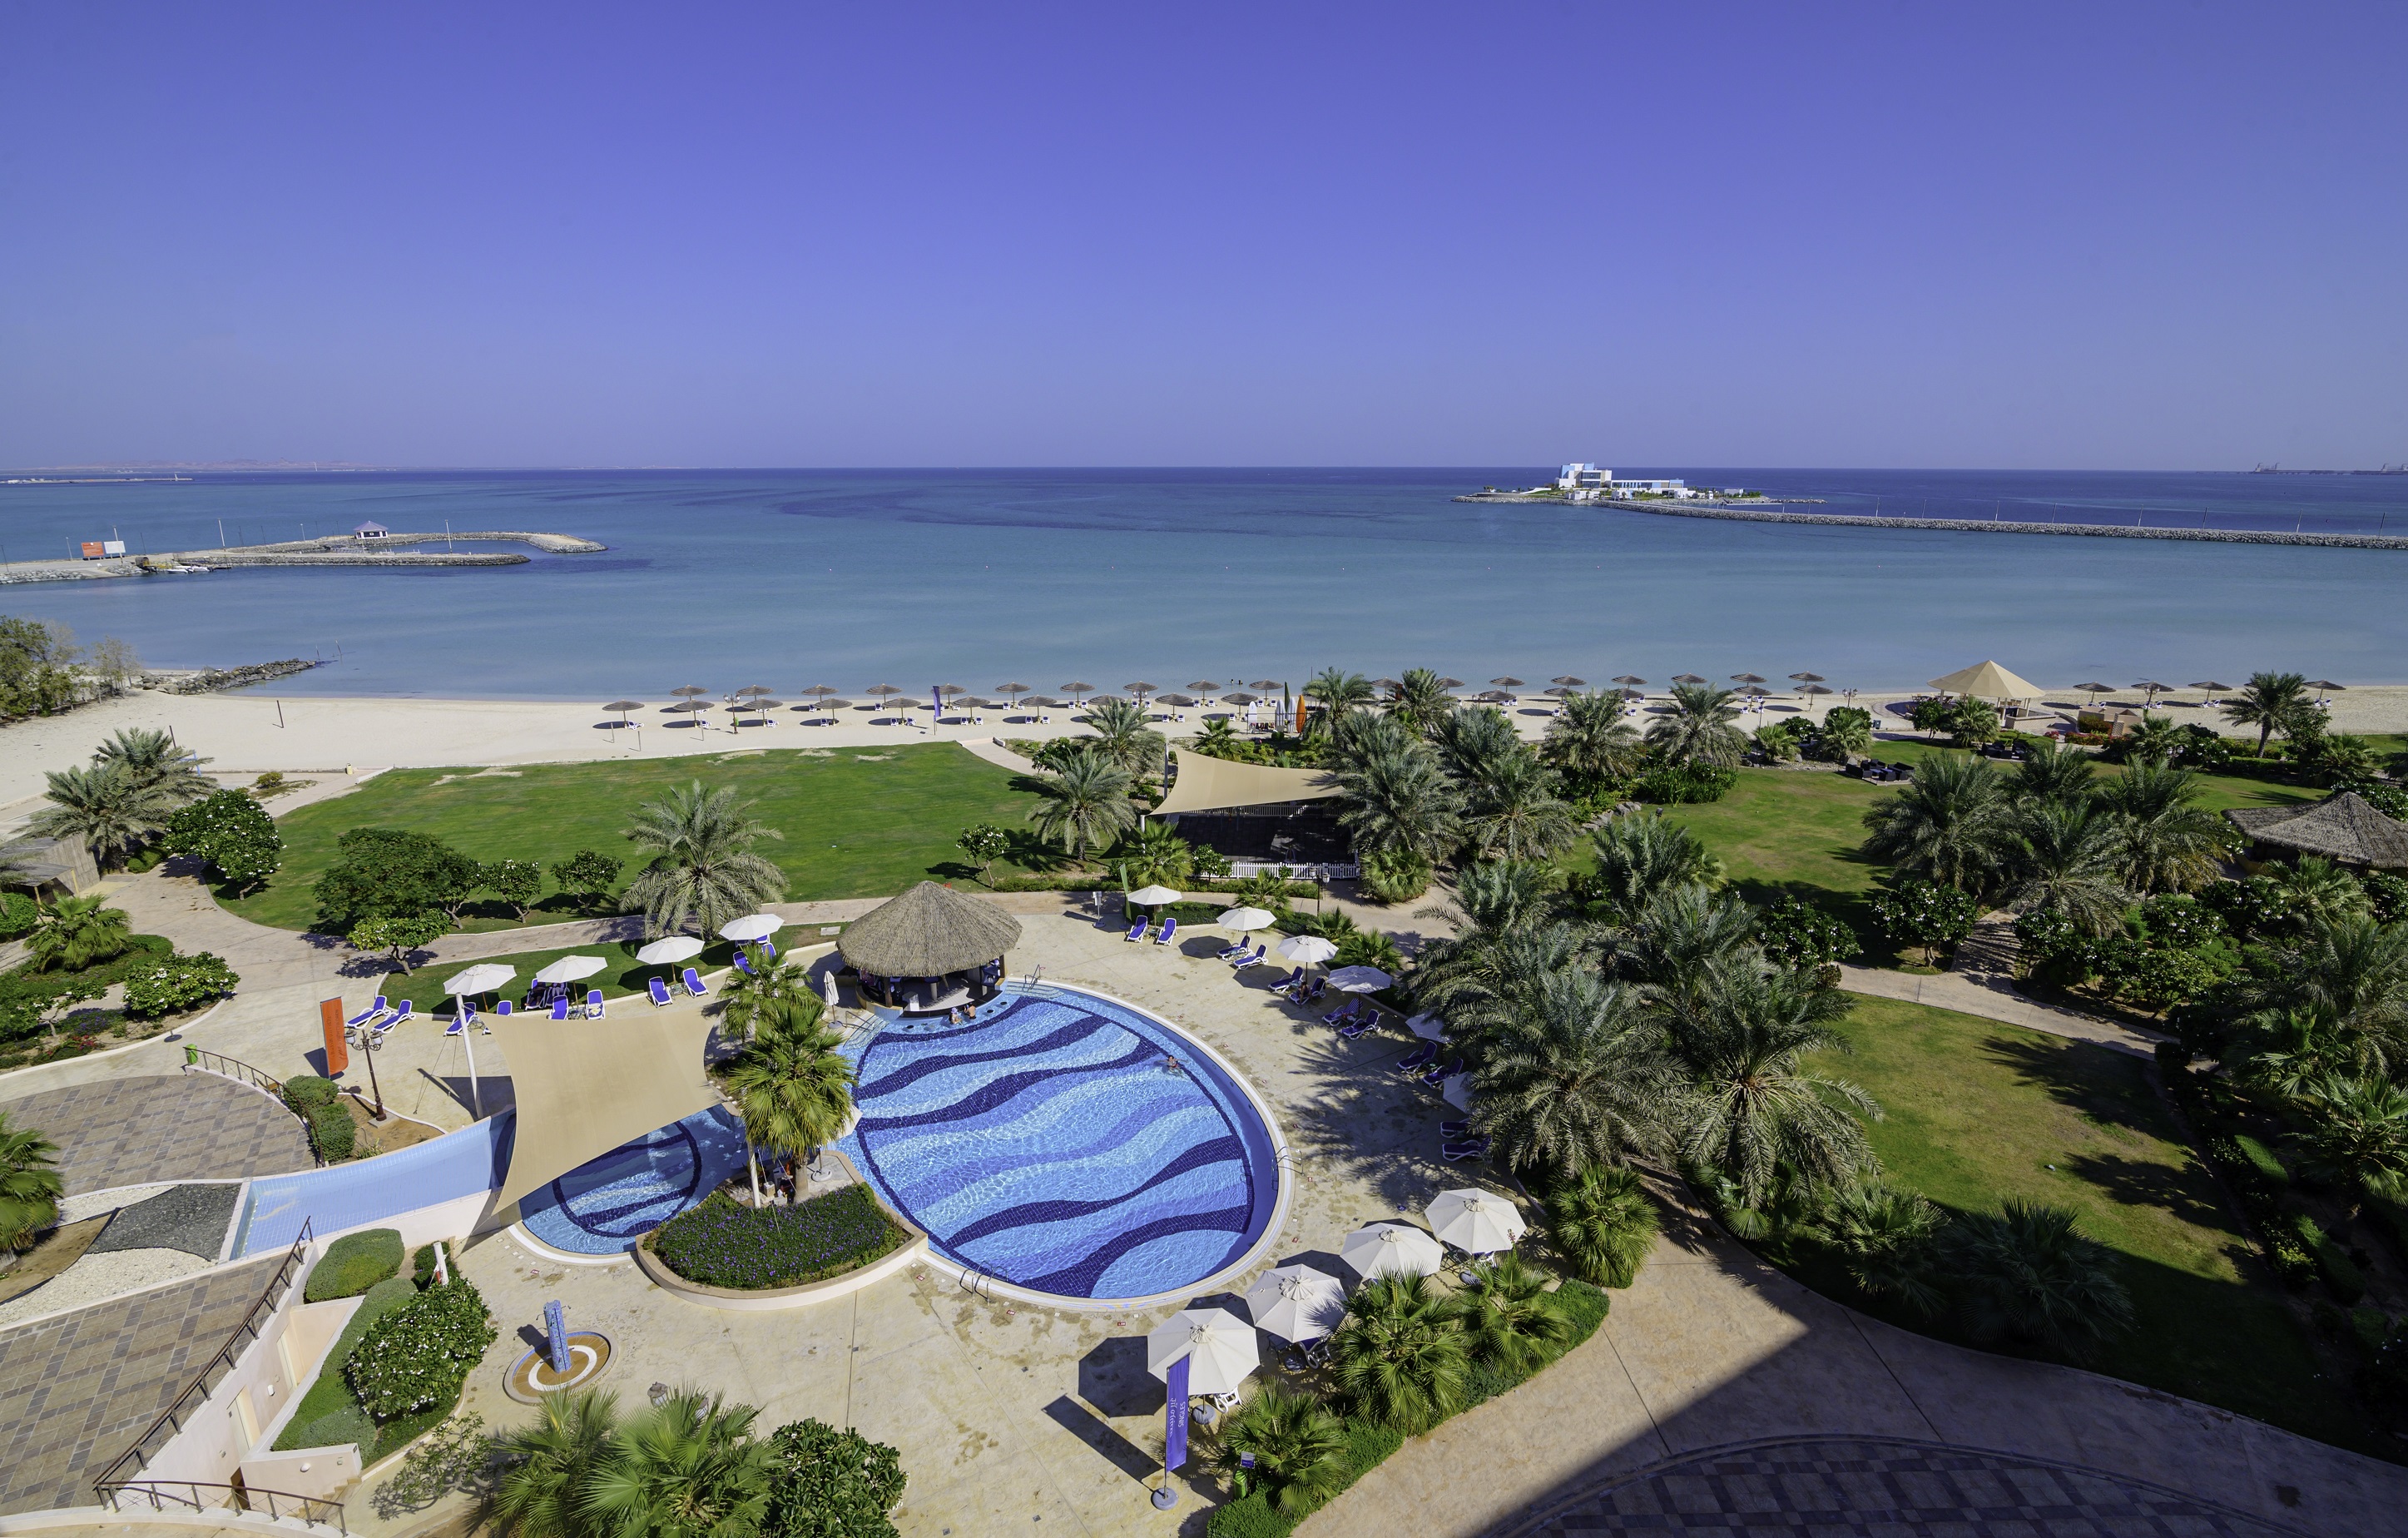 Kick Off the Summer with the All-Inclusive ‎ Staycation at Danat Jebel Dhanna Resort